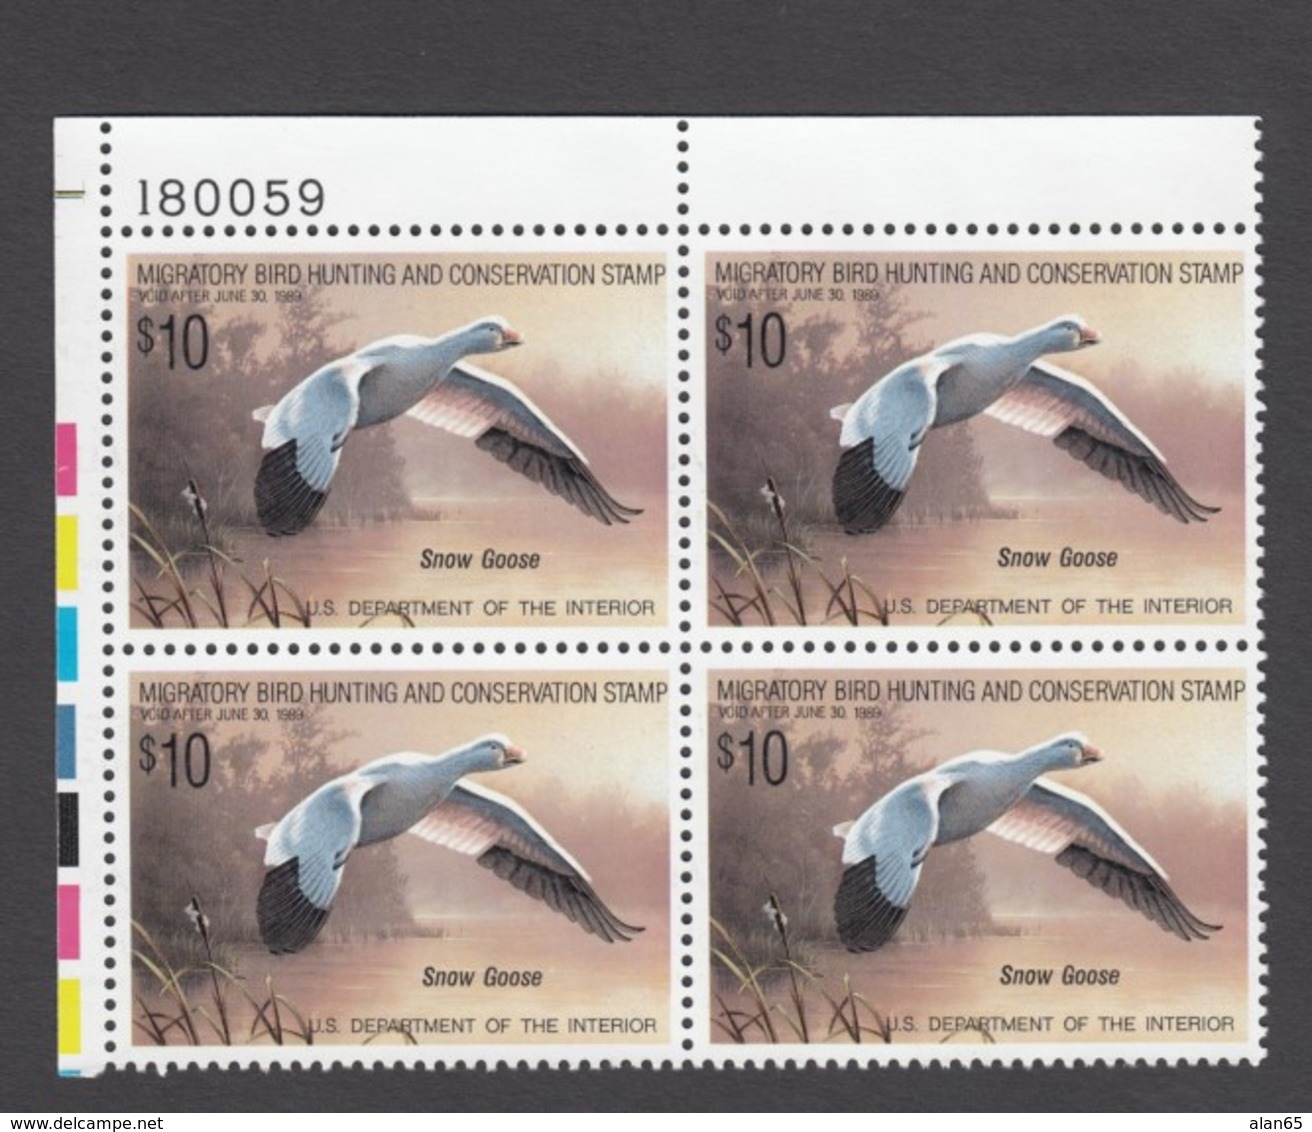 Sc#RW55 MNH Plate # Block Of 4 $10.00 1988 Duck Hunting Stamps, Migratory Bird Hunting & Conservation - Duck Stamps